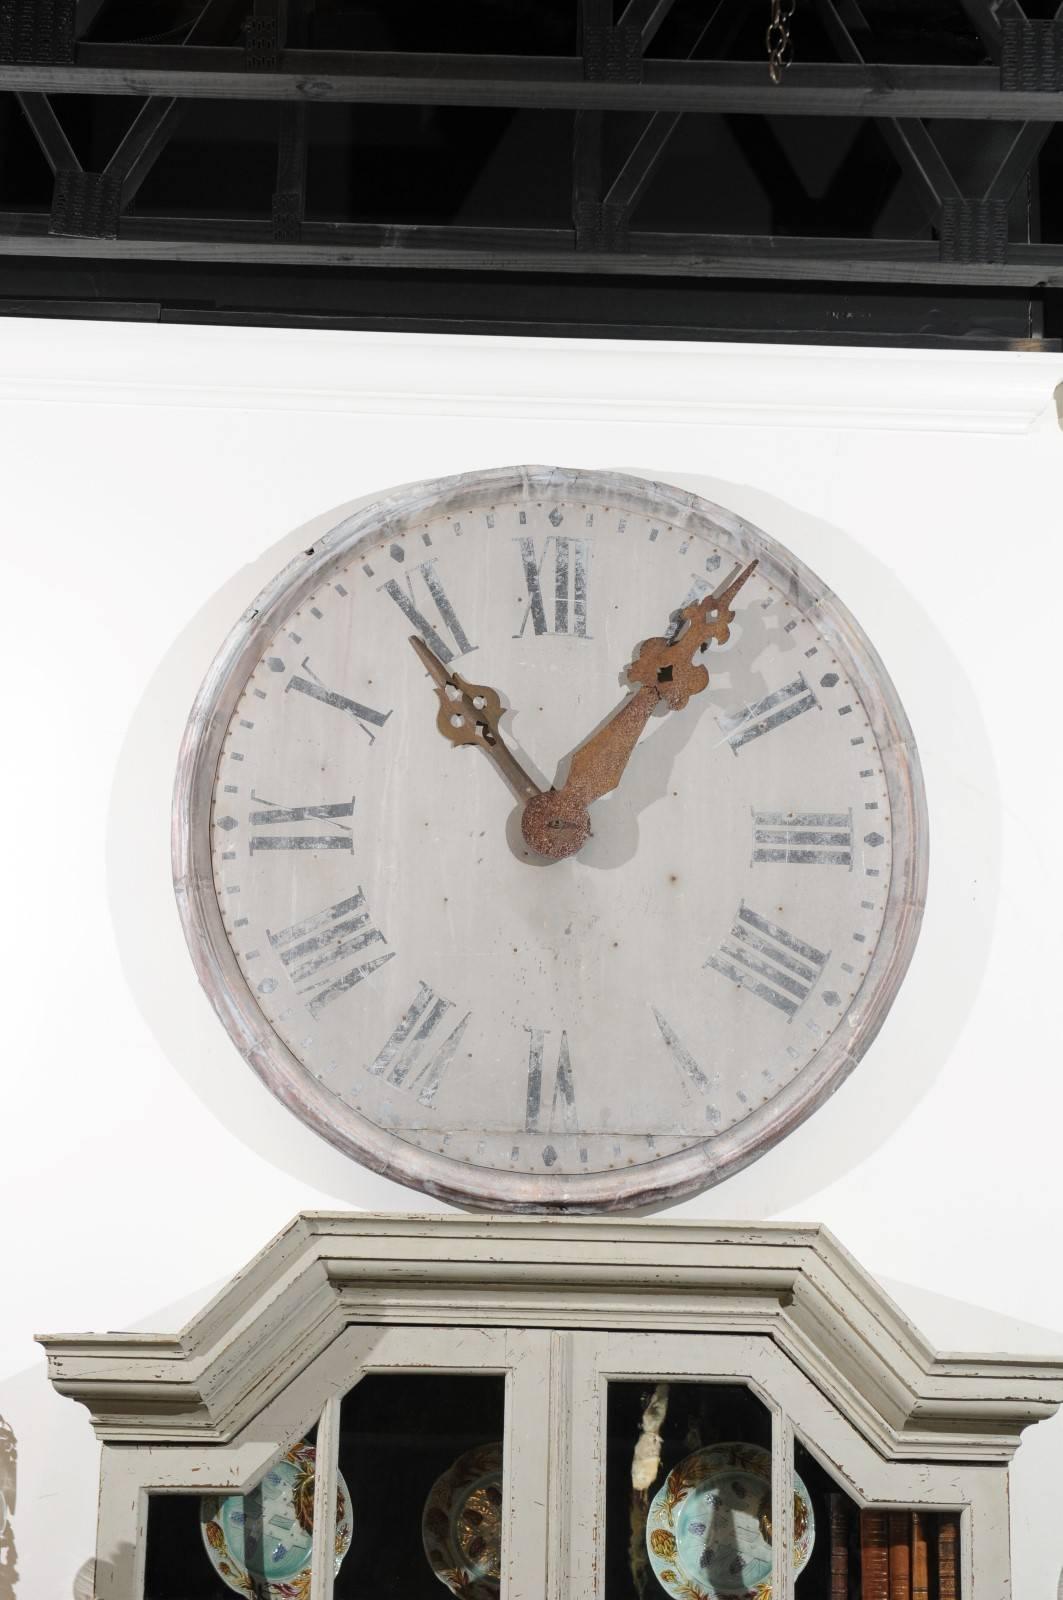 A French large size zinc decorative clock face with Roman numerals and original hands from the late 19th century. Set within a simple circular frame, this French clock features a nicely weathered face with Roman numerals and exquisite rusty iron